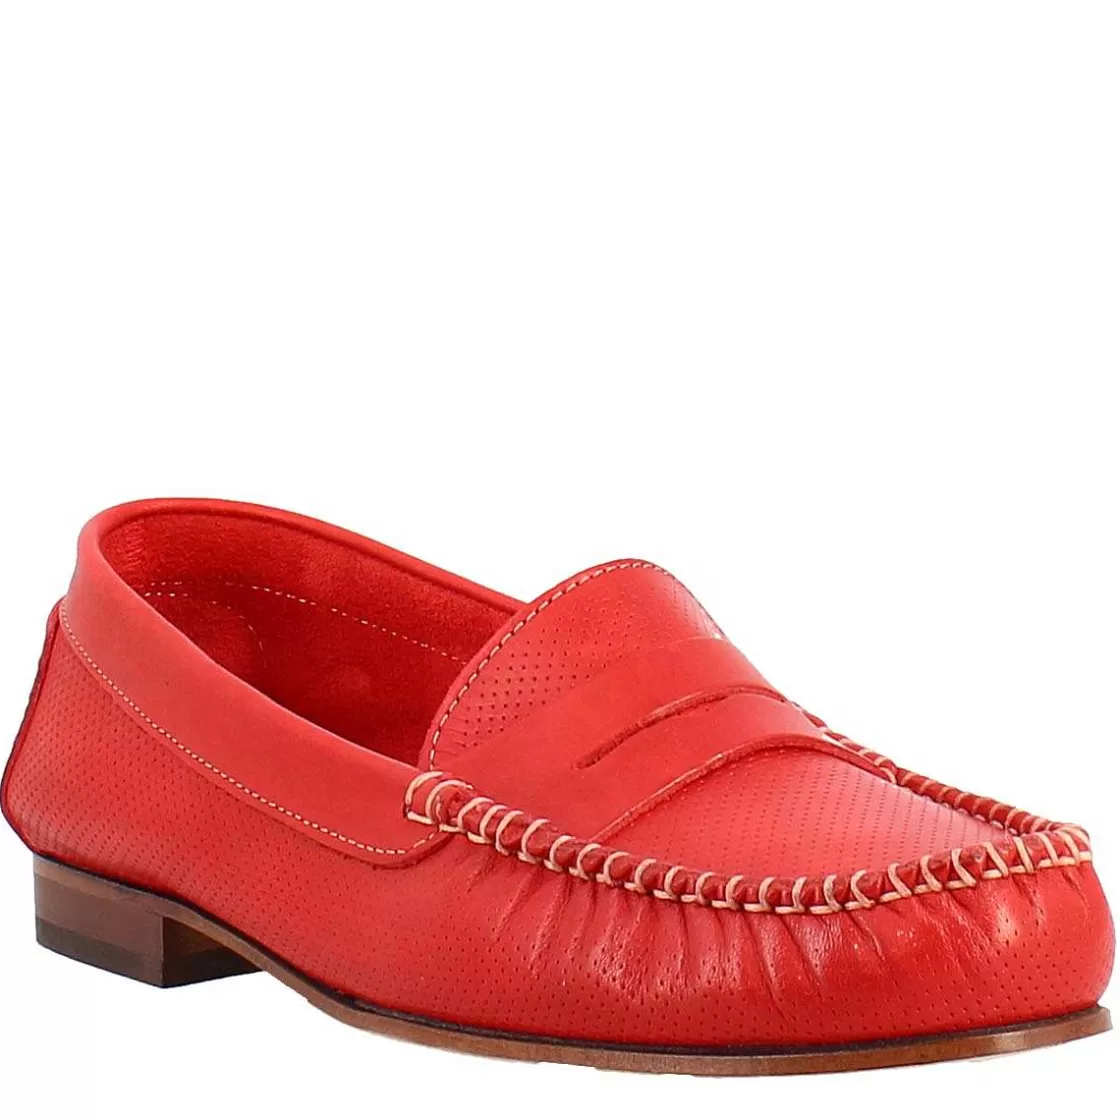 Leonardo Handmade College Loafers For Women In Red Perforated Leather Online